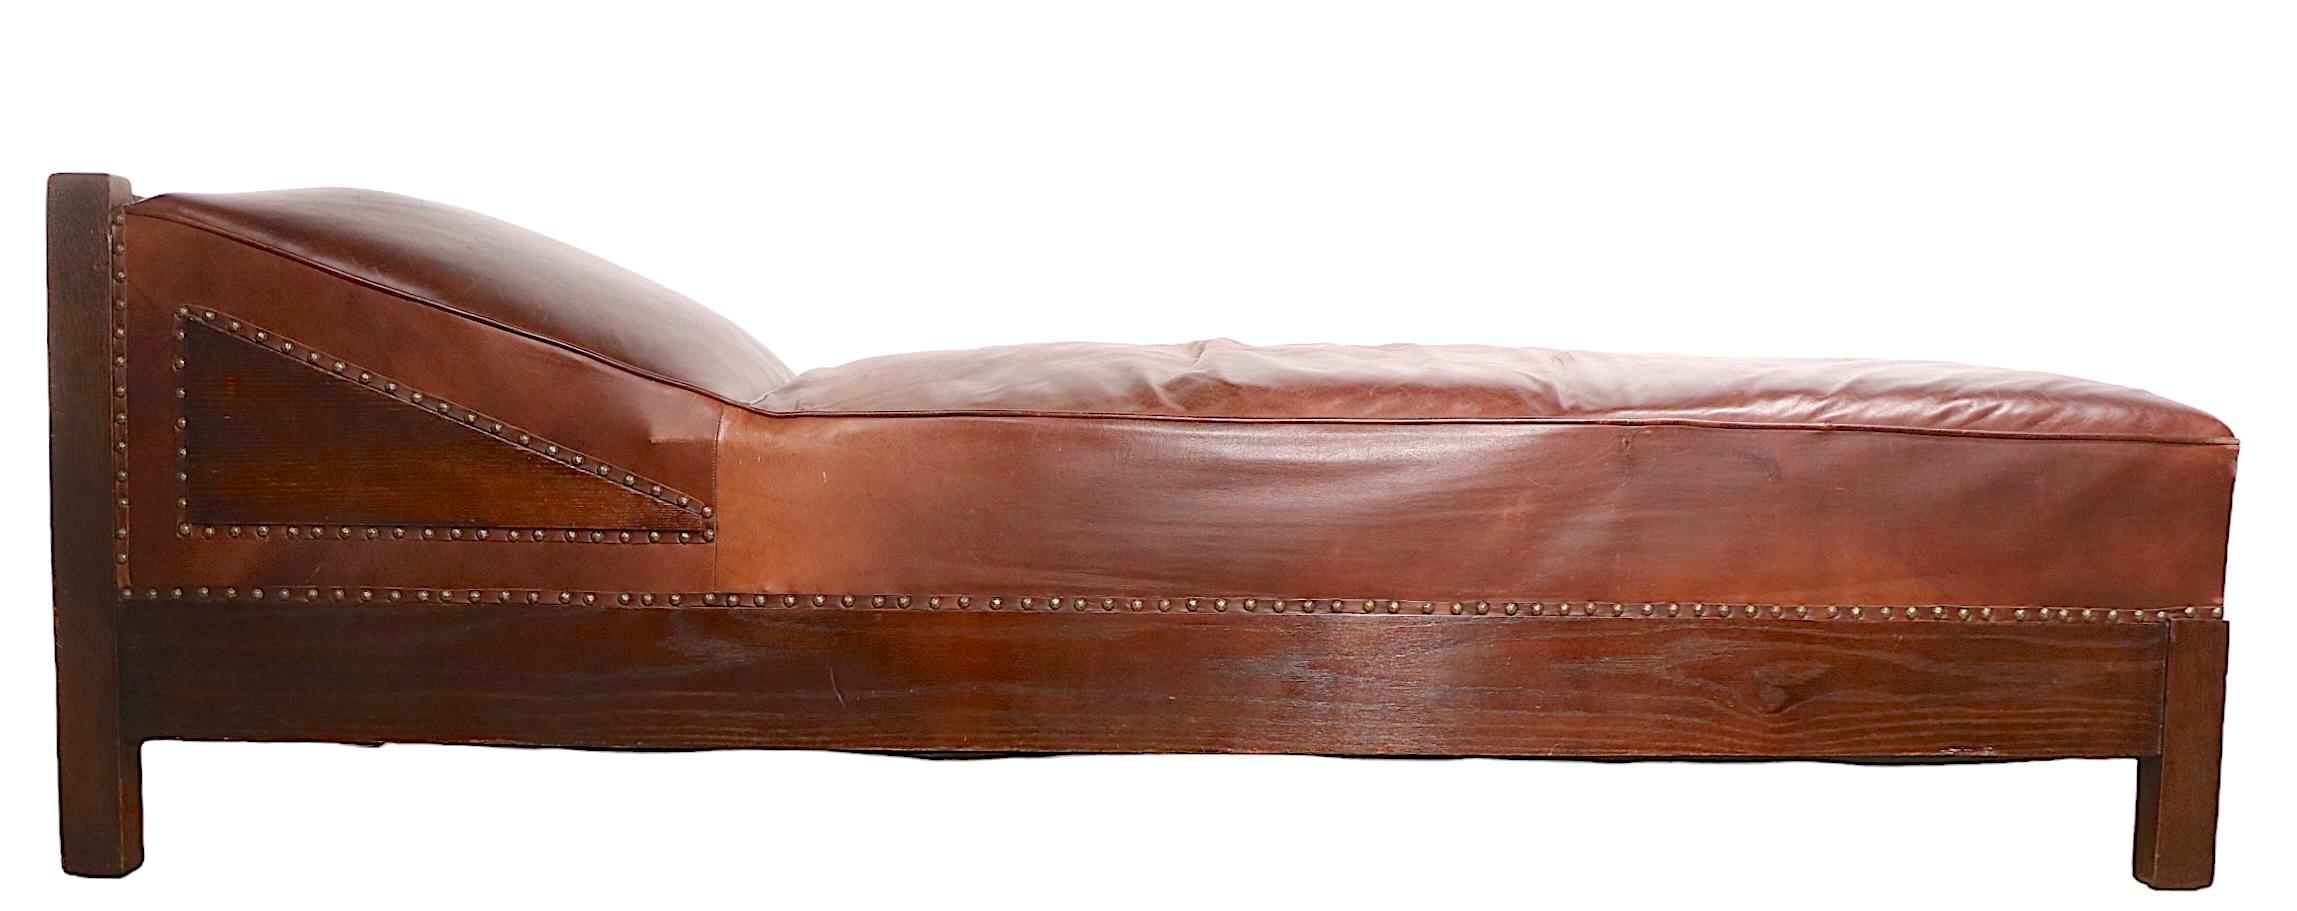 Oak and Leather Arts and Crafts Mission Daybed Chaise Lounge c. 1900 -1920's 4